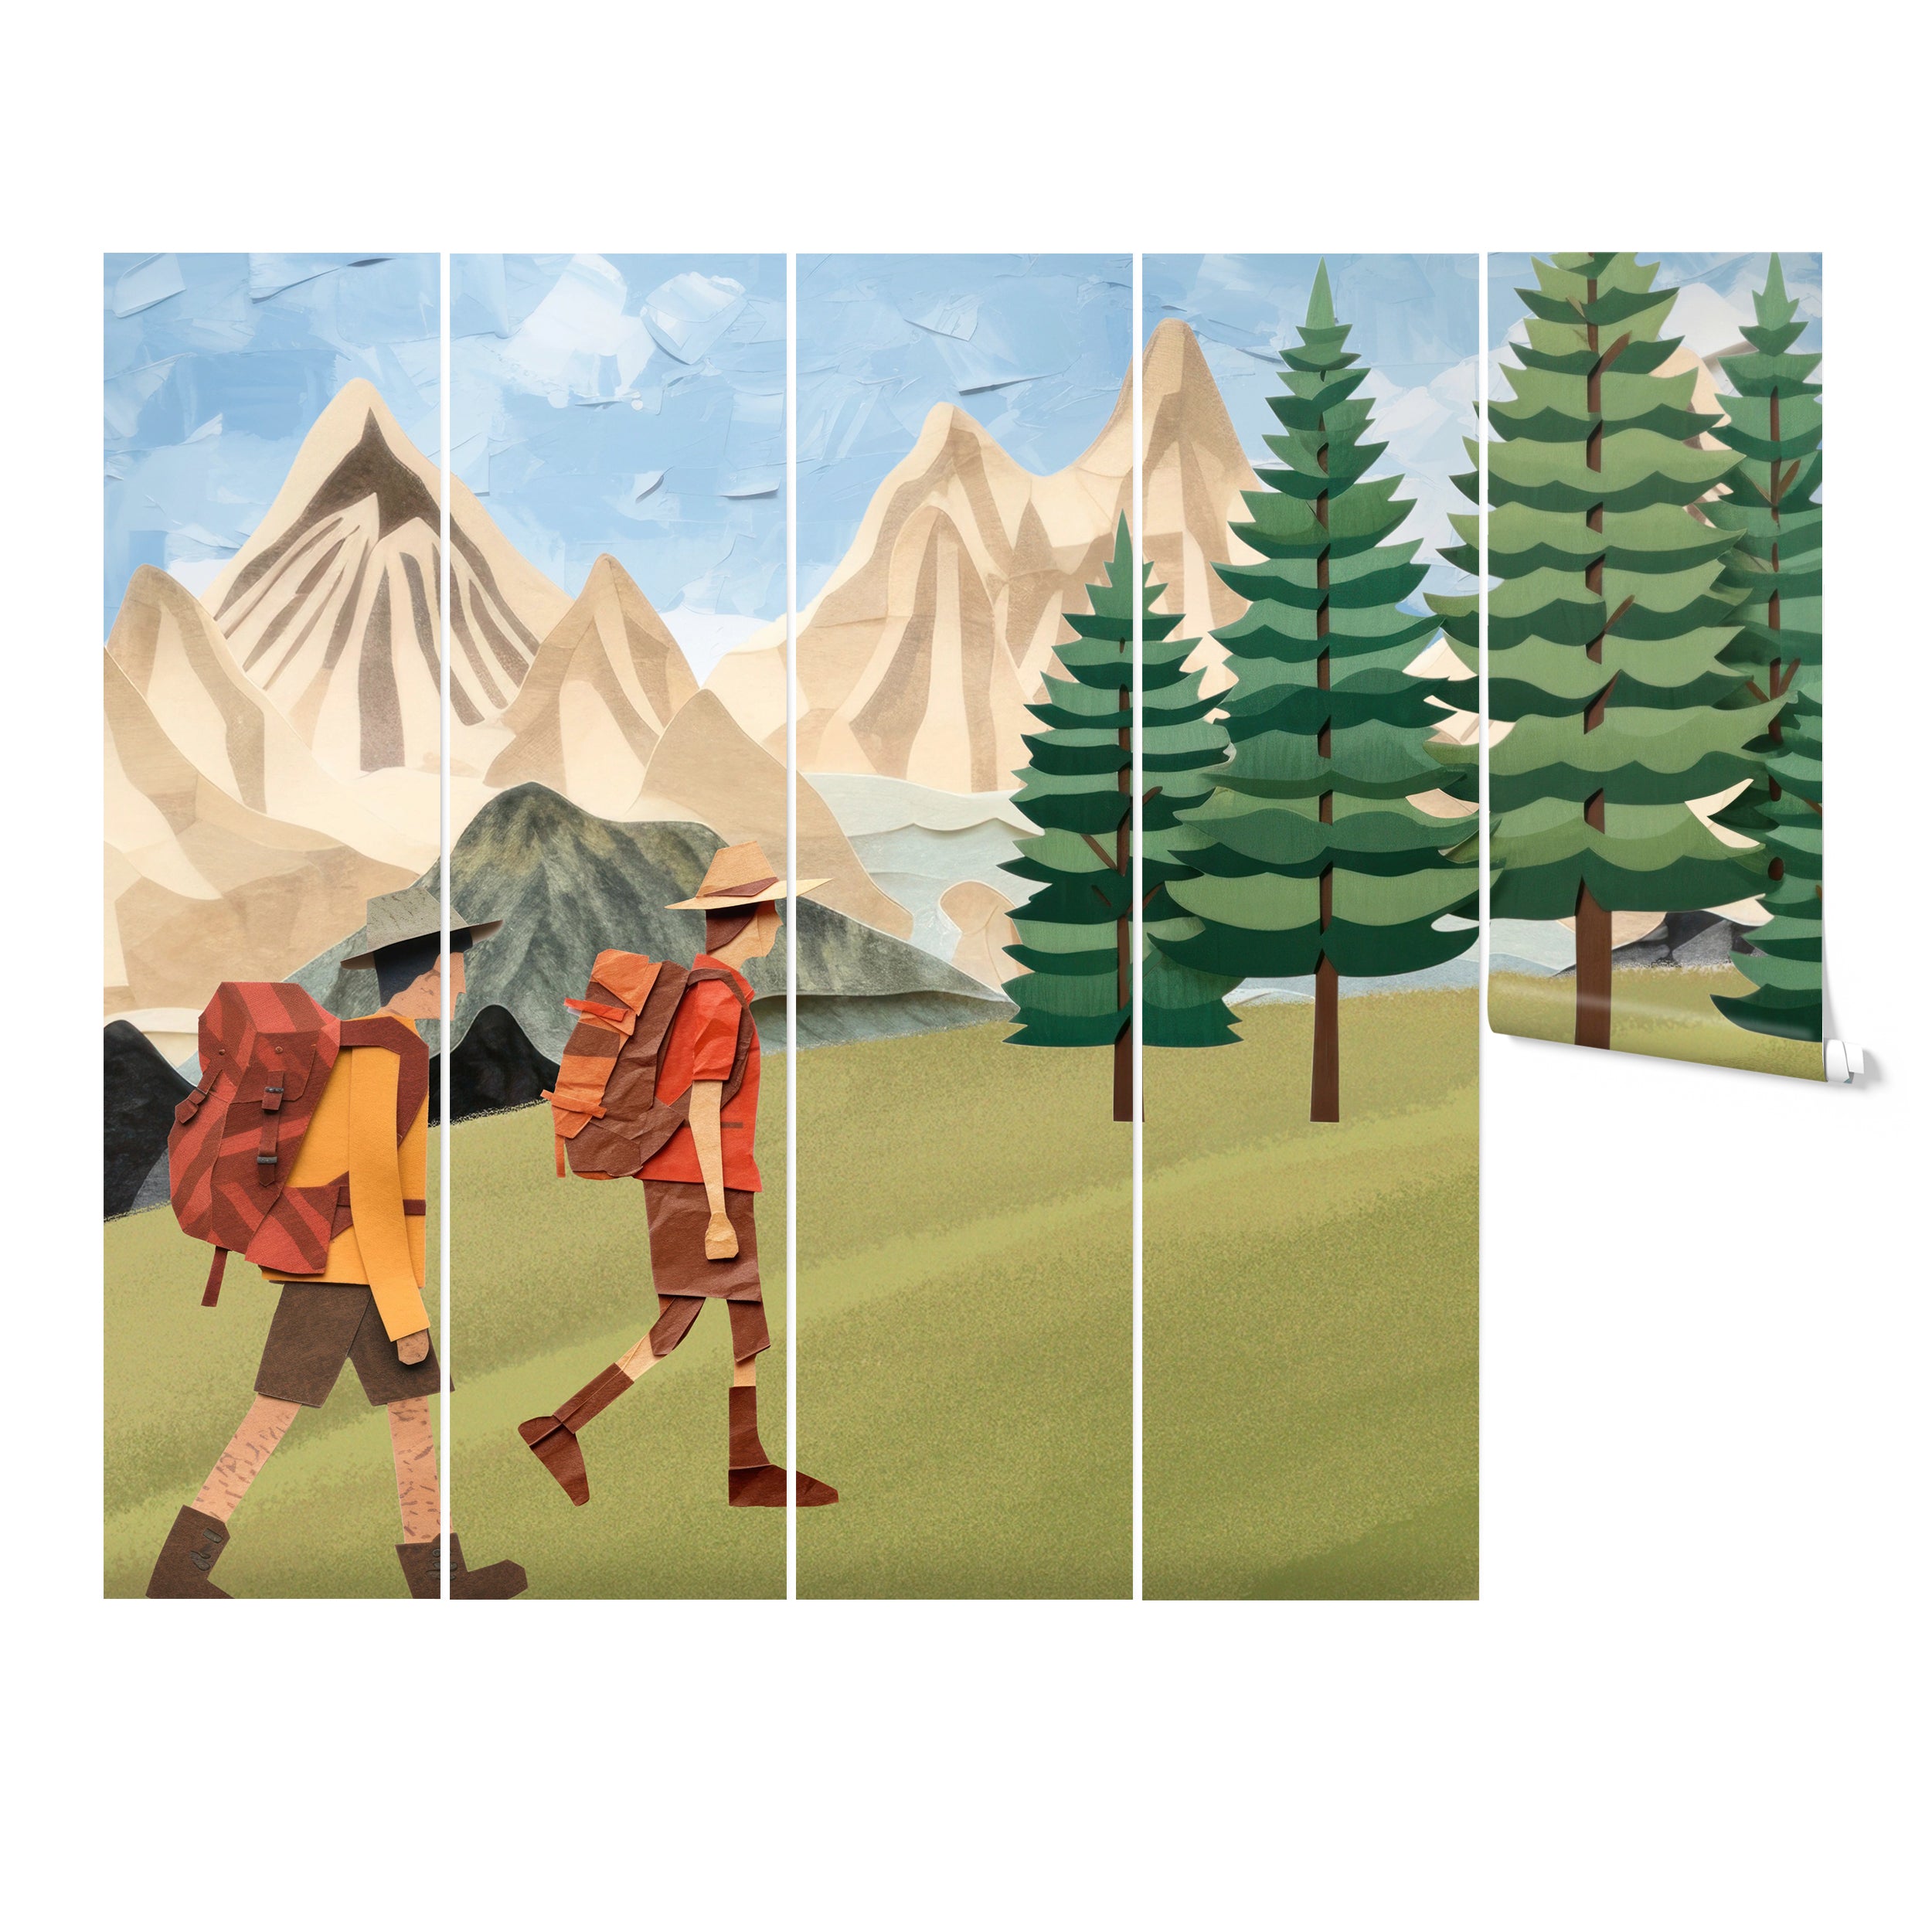 "Five rolls of wallpaper showing sections of a mural with hikers, mountains, and pine trees, designed for a children’s room or nursery."